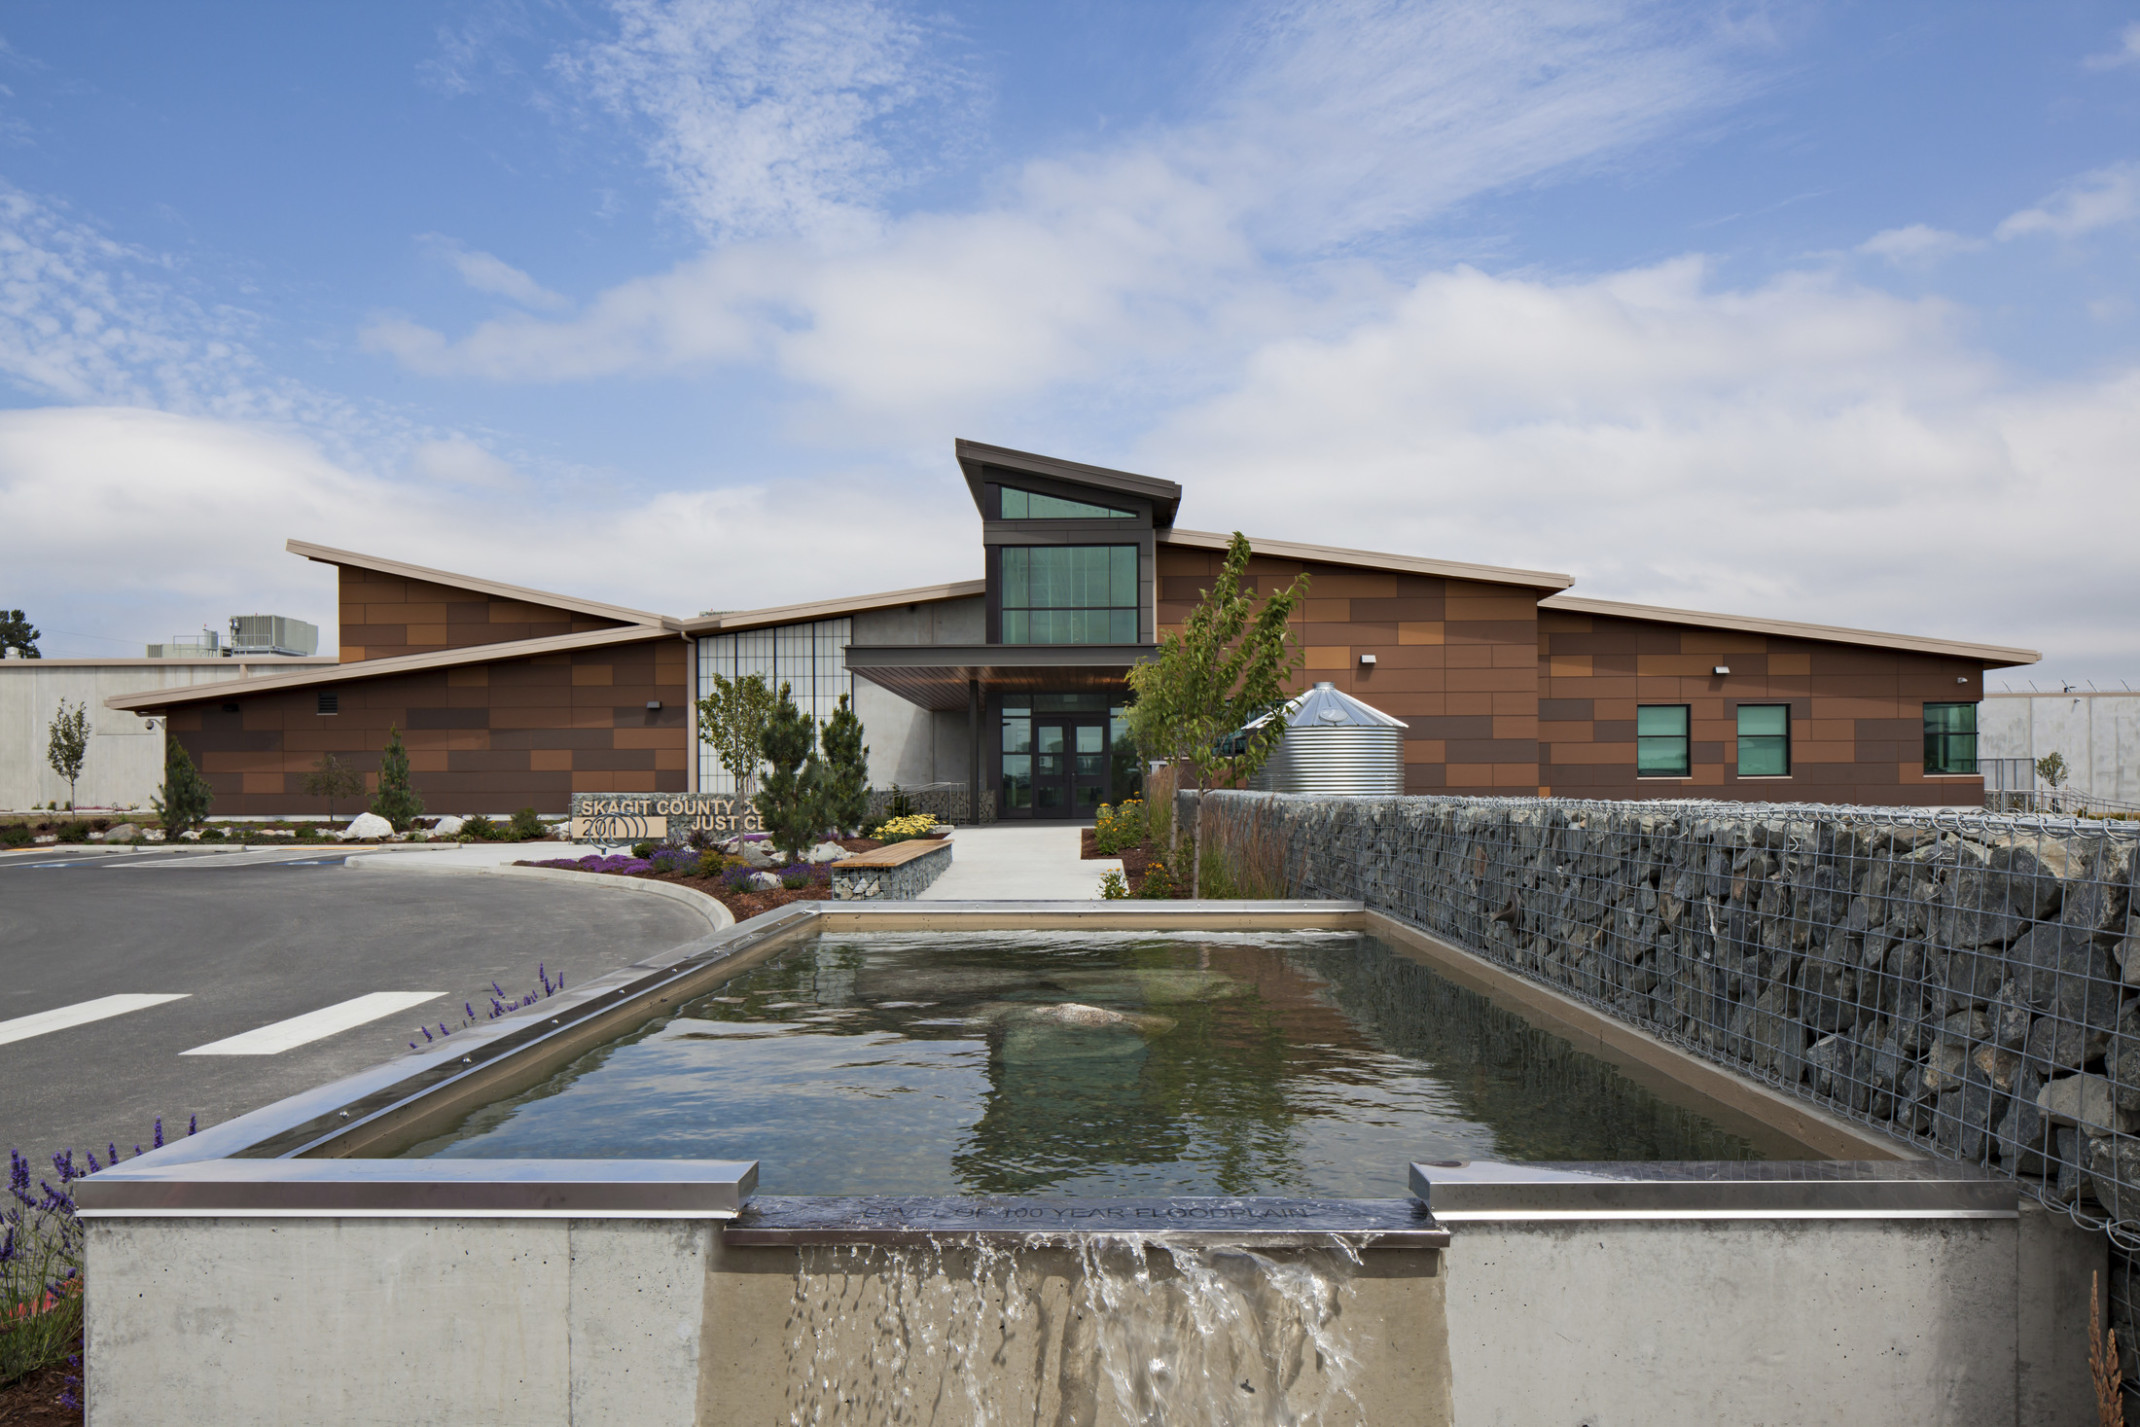 The Skagit County Community Justice Center, a stone building with central entryway. Front is water feature and stone gabion